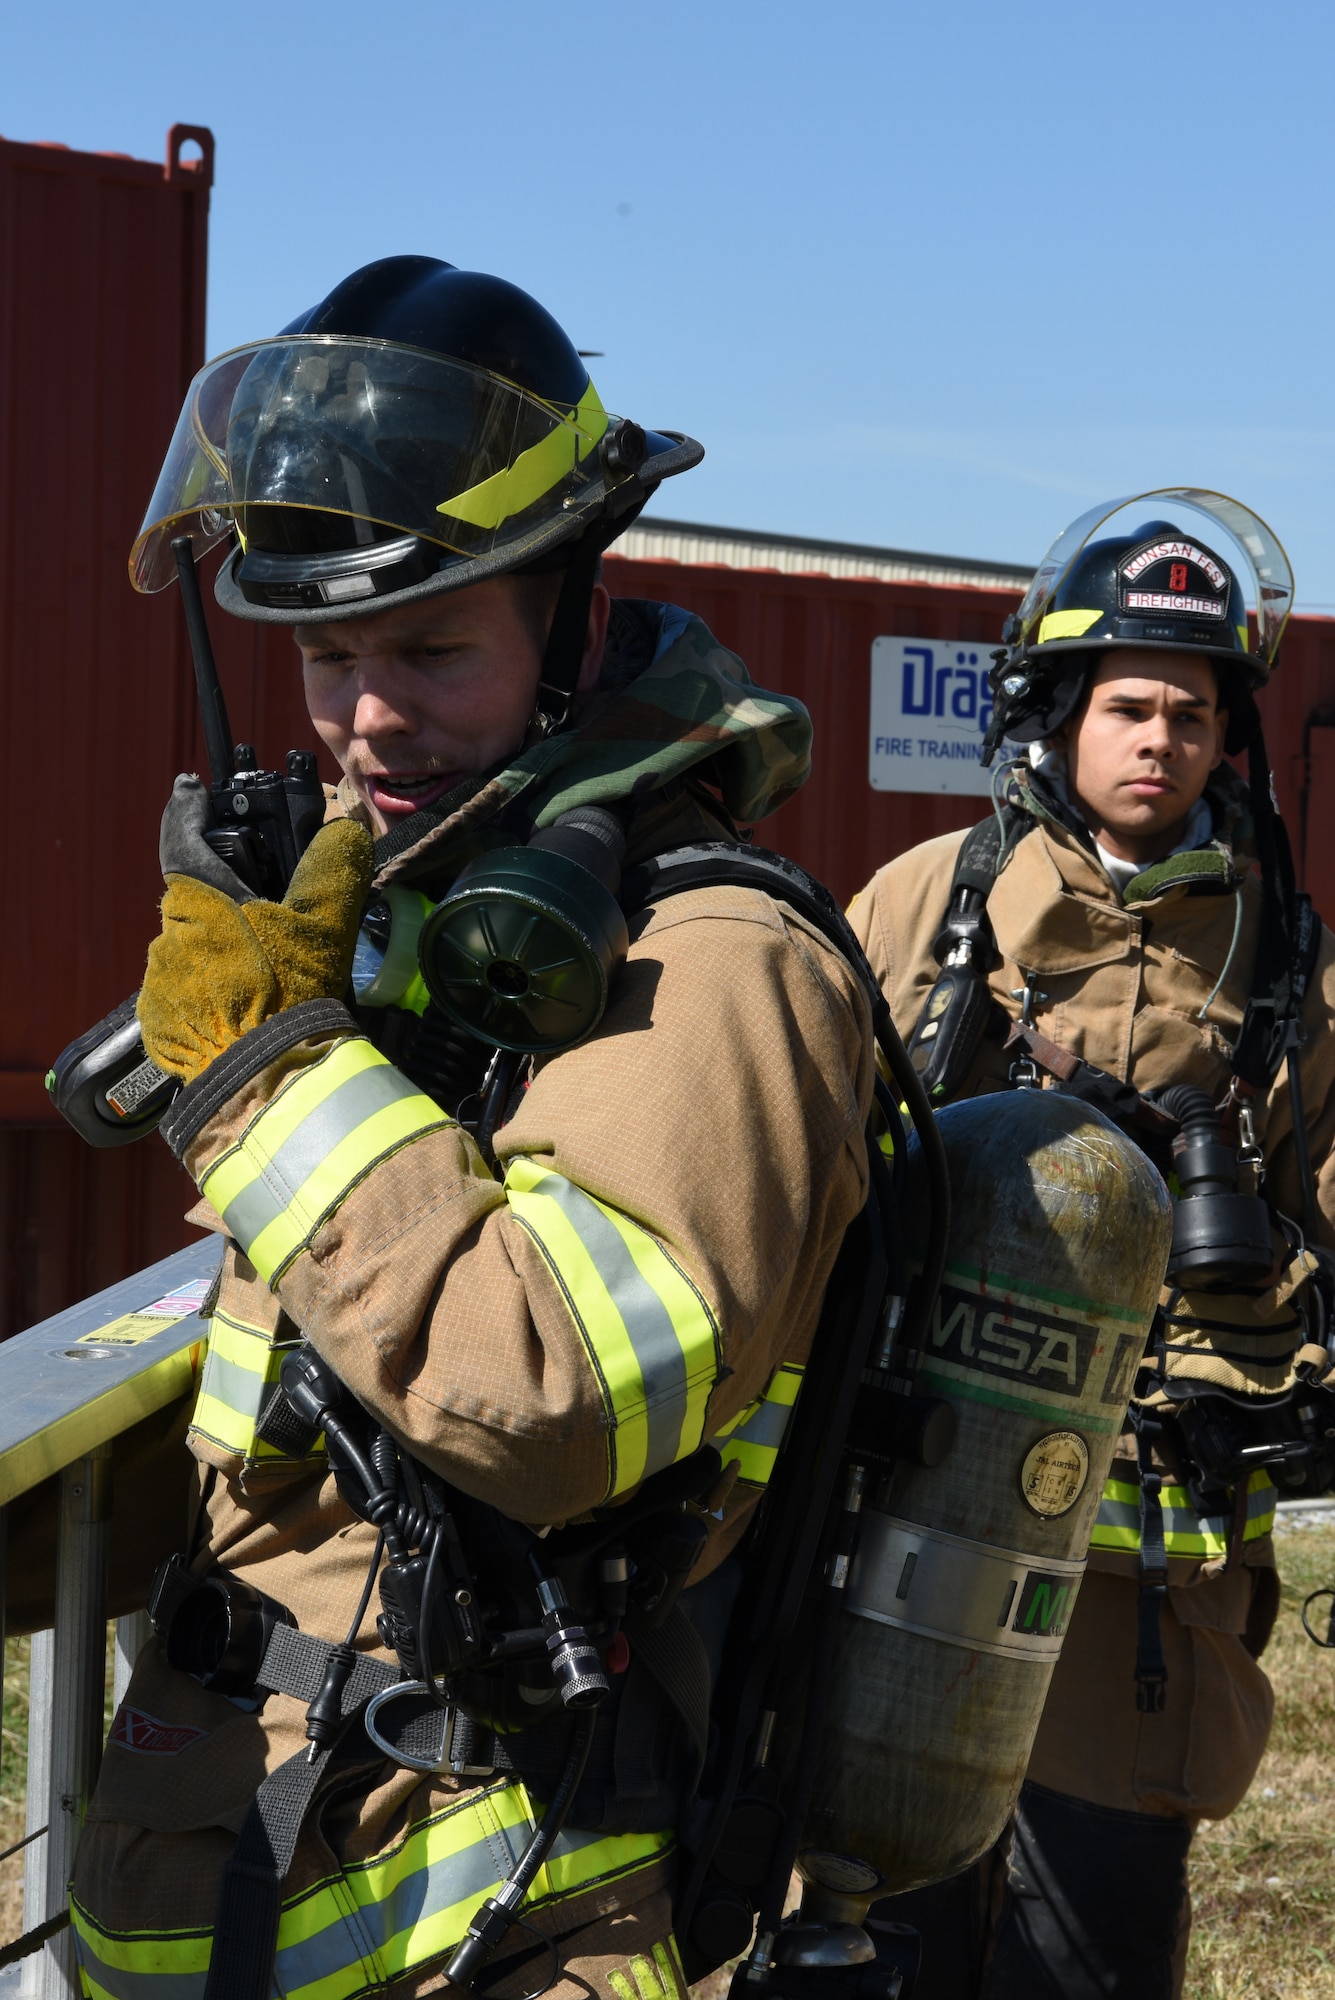 U.S. Air Force 8th Civil Engineer Squadron firefighters radio in about a fire during a training event at Kunsan Air Base, Republic of Korea, Oct. 9, 2019. The 8th CES firefighters train in multiple scenarios including plane incidents, car accidents and structure fires to be able to react to real world events. (U.S. Air Force photo by Staff Sgt. Joshua Edwards)